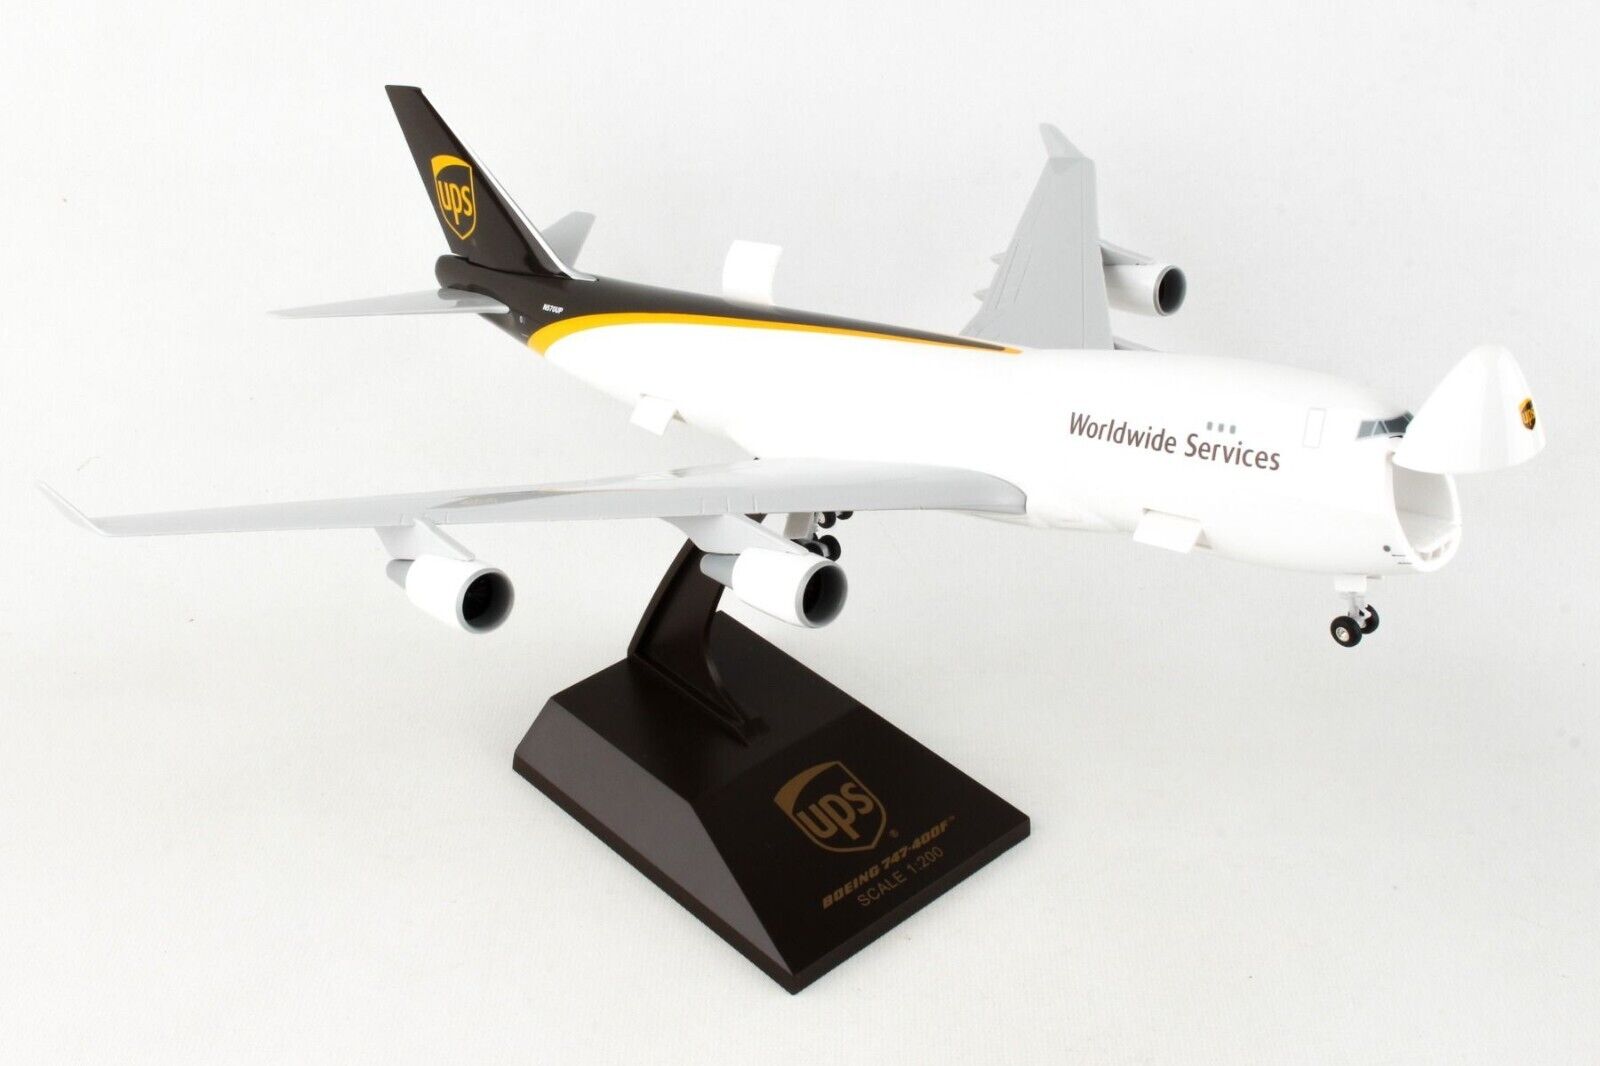 SKYMARKS (SKR1113) UPS 747-400F 1:200 SCALE MODEL WITH OPENING NOSE & DOORS